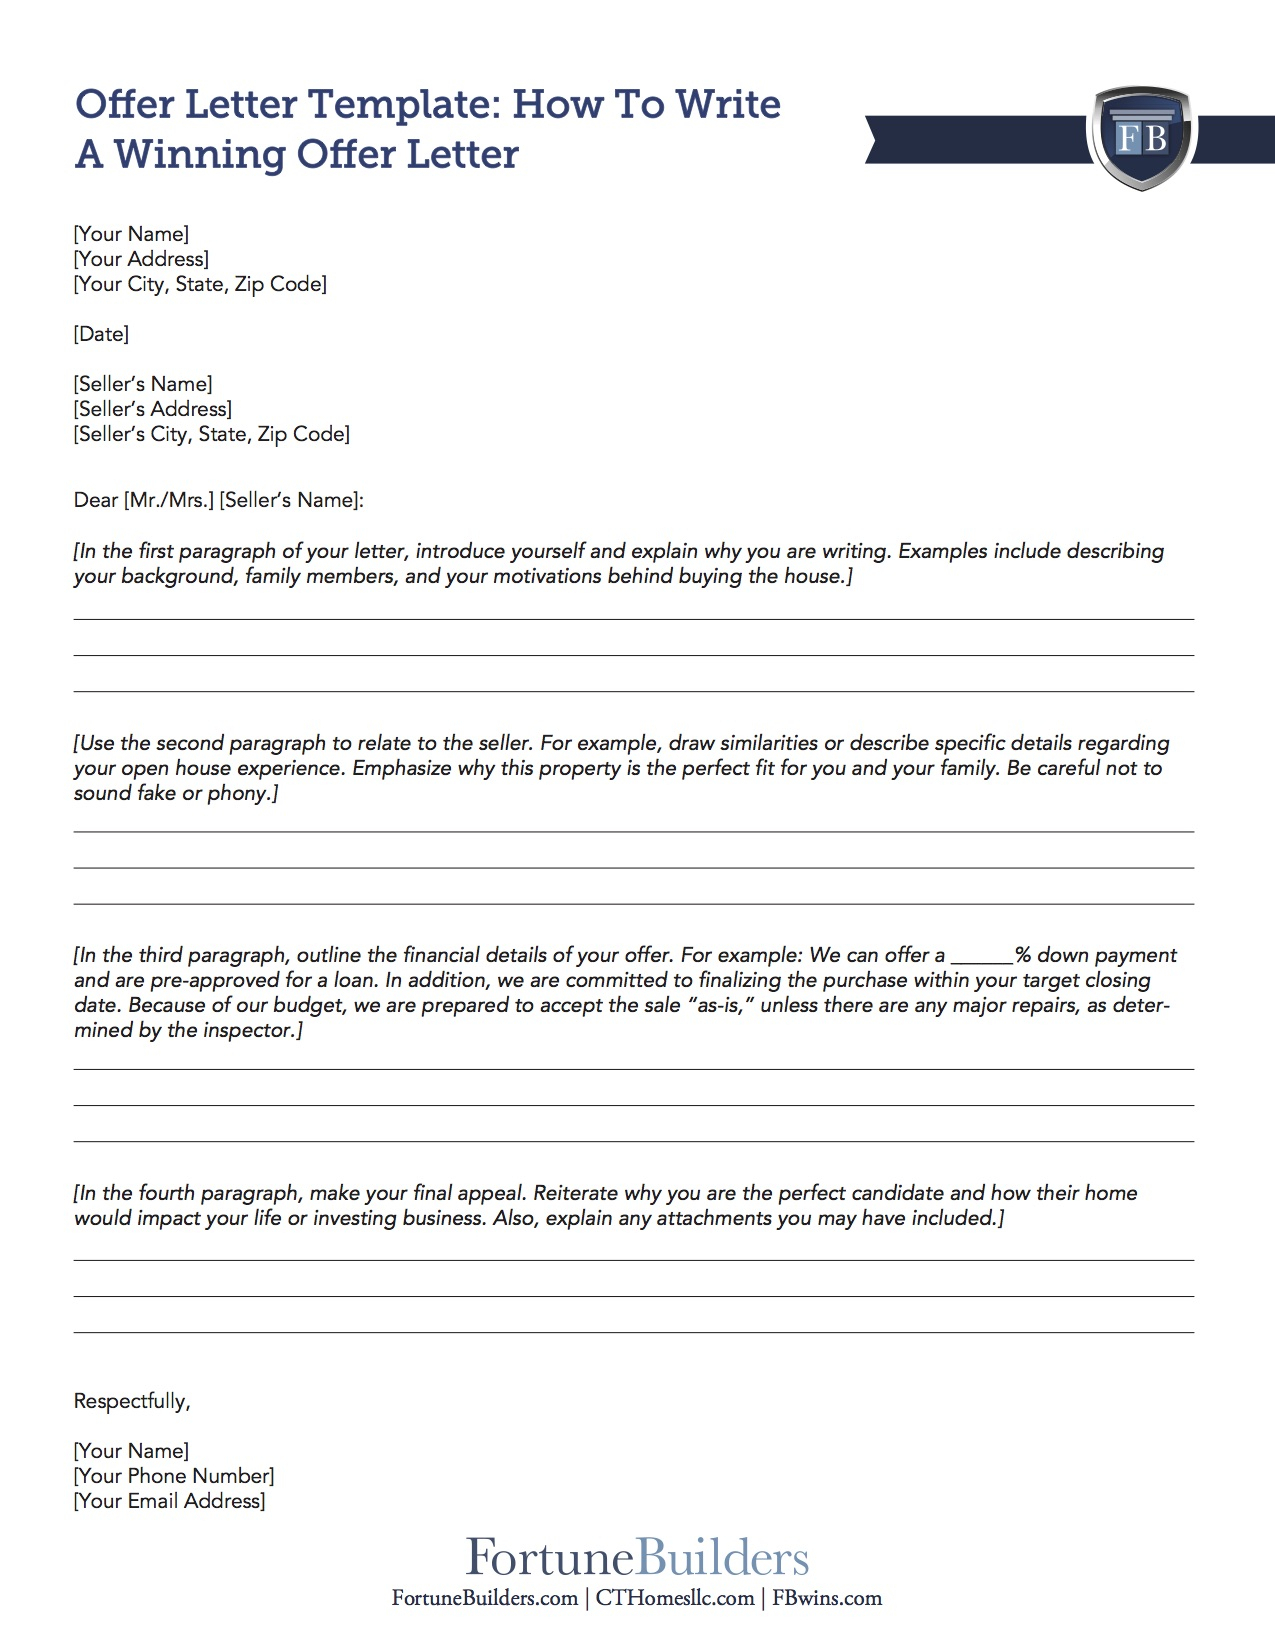 Free Real Estate Offer Letter Template | Fortunebuilders For Home Offer Letter Template